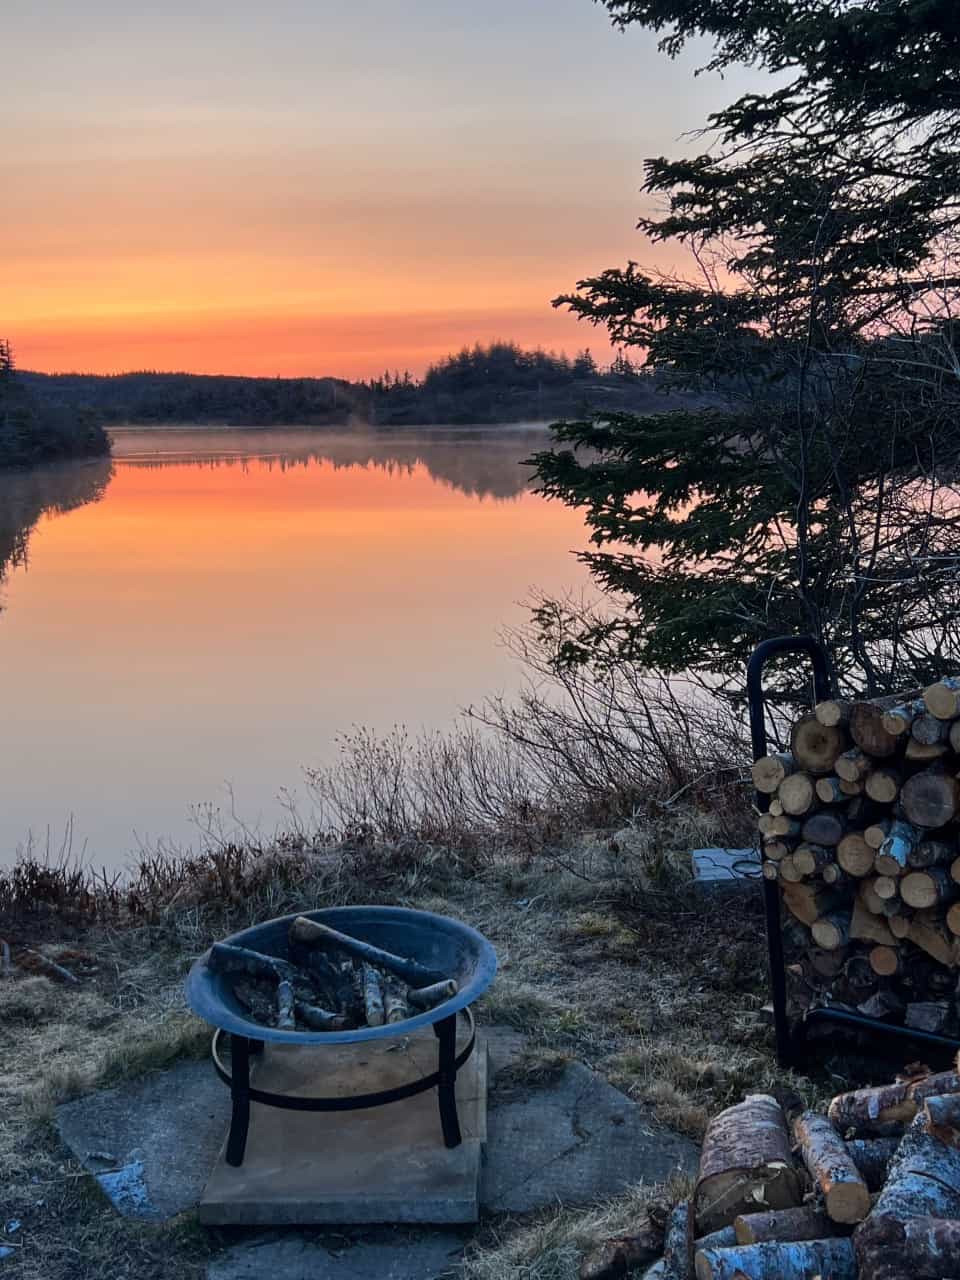 Pond Sunrise in NL Canada - Sunrise over Brigus pond did not disappoint. It was so refreshing to feel the crisp morning air and watch the mist rise off the water. 